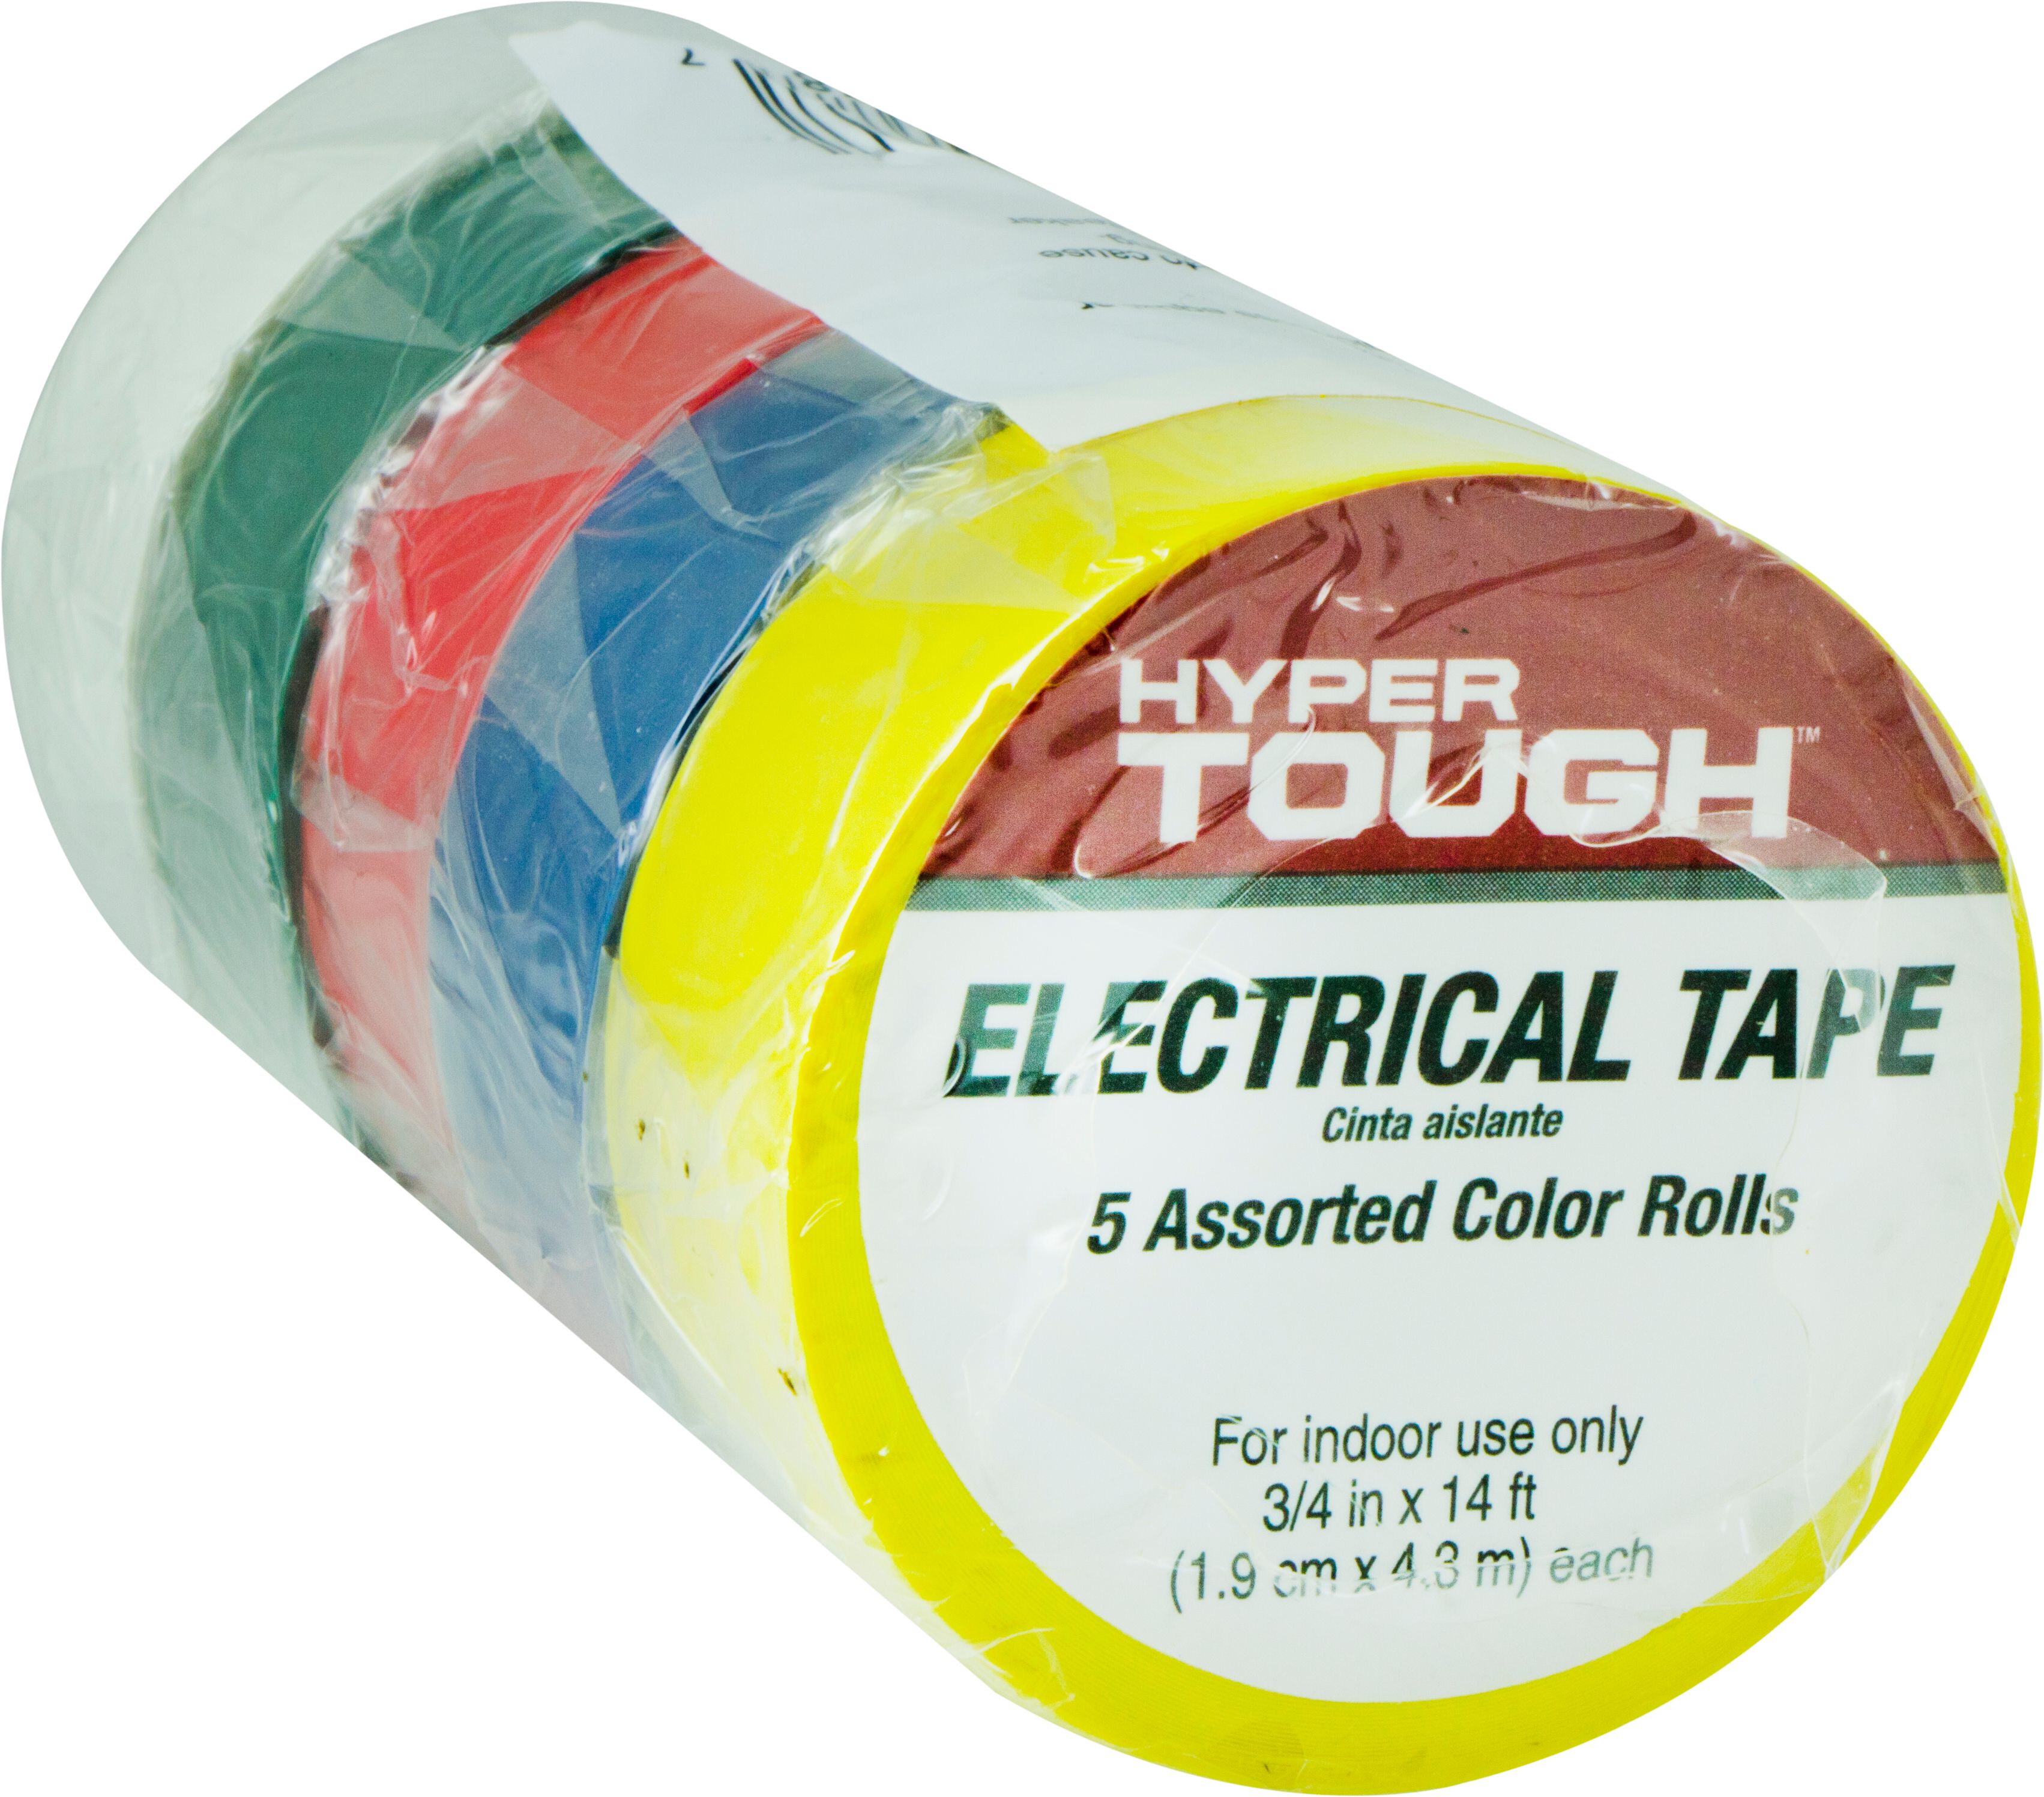 Hyper Tough Assorted Color Electrical Tape, 14ft length, Indoor, 5 Pack, 3/4in, 0.26lbs - 35831 - image 3 of 5